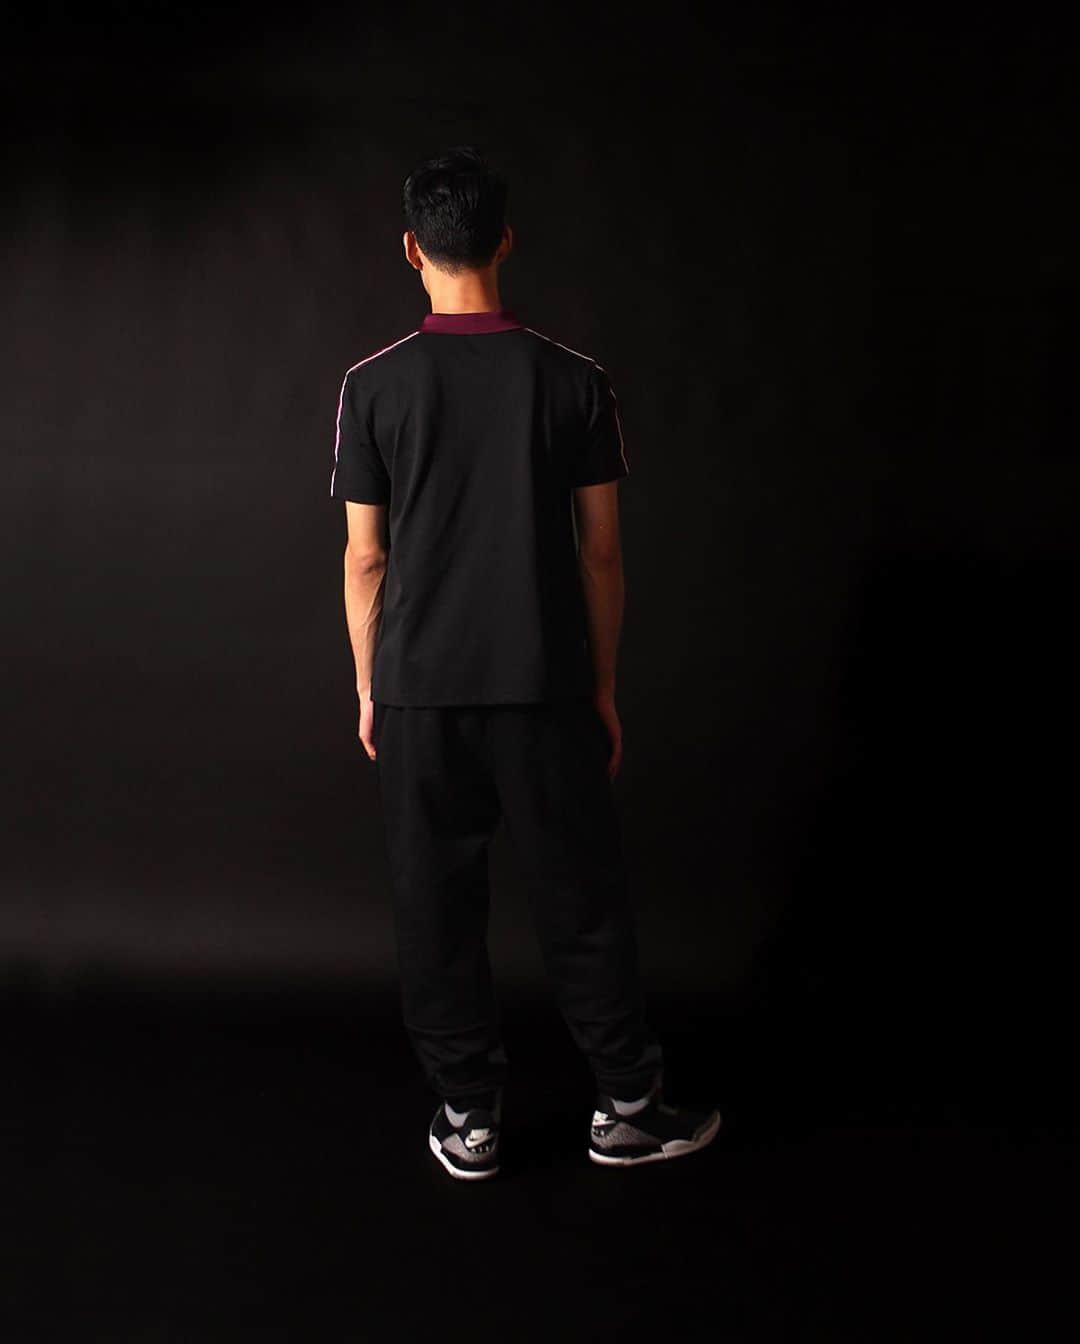 A+Sさんのインスタグラム写真 - (A+SInstagram)「2020 .10 .11 (sun) in store  ■NIKE JORDAN PSG TAPED POLO COLOR : BLACK×BORDEAUX SIZE : S - 2XL PRICE : ¥8,500 (+TAX)  パリ・サンジェルマンのテーピングポロは、試合後のプレッサーで着用したチームアパレルから着想を得ています。クラシックなピケ生地、折り畳み式の襟、2ボタンの前立てが特徴です。肩に沿ったストライプのテープがコントラストの要素を加えています。  THE PARISIAN POLO. The Paris Saint-Germain Taped Polo is inspired by team apparel worn during the post-match presser. It features classic piqué fabric, a fold-down collar and 2-button placket. Striped tape along the shoulders adds an element of contrast.  ■NIKE JORDAN PSG FLEECE PANT COLOR : BLACK SIZE : S - 2XL PRICE : ¥8,000 (+TAX)  フランスのサッカークラブ、パリ・サンジェルマンとジョーダンのブランドのデザインコラボレーションは続いています。これらのパンツは、暖かく、柔らかく起毛した生地から作られ、パートナーシップを祝う明白なグラフィックとパッチの詳細で際立っています。  REPRESENT IN RELAXED WARMTH. The design collaboration between French soccer club Paris Saint-Germain and Jordan brand continues. These pants are made from warm, softly brushed fabric and stand out with overt graphics and patch detail celebrating the partnership.  #a_and_s #NIKE #PSG #JORDAN #JUMPMAN #JUMPMAN23 #NIKEJORDAN #JORDANBRAND #JORDANBRANDPSG #CICESTPARIS #PANAME」10月7日 11時50分 - a_and_s_official